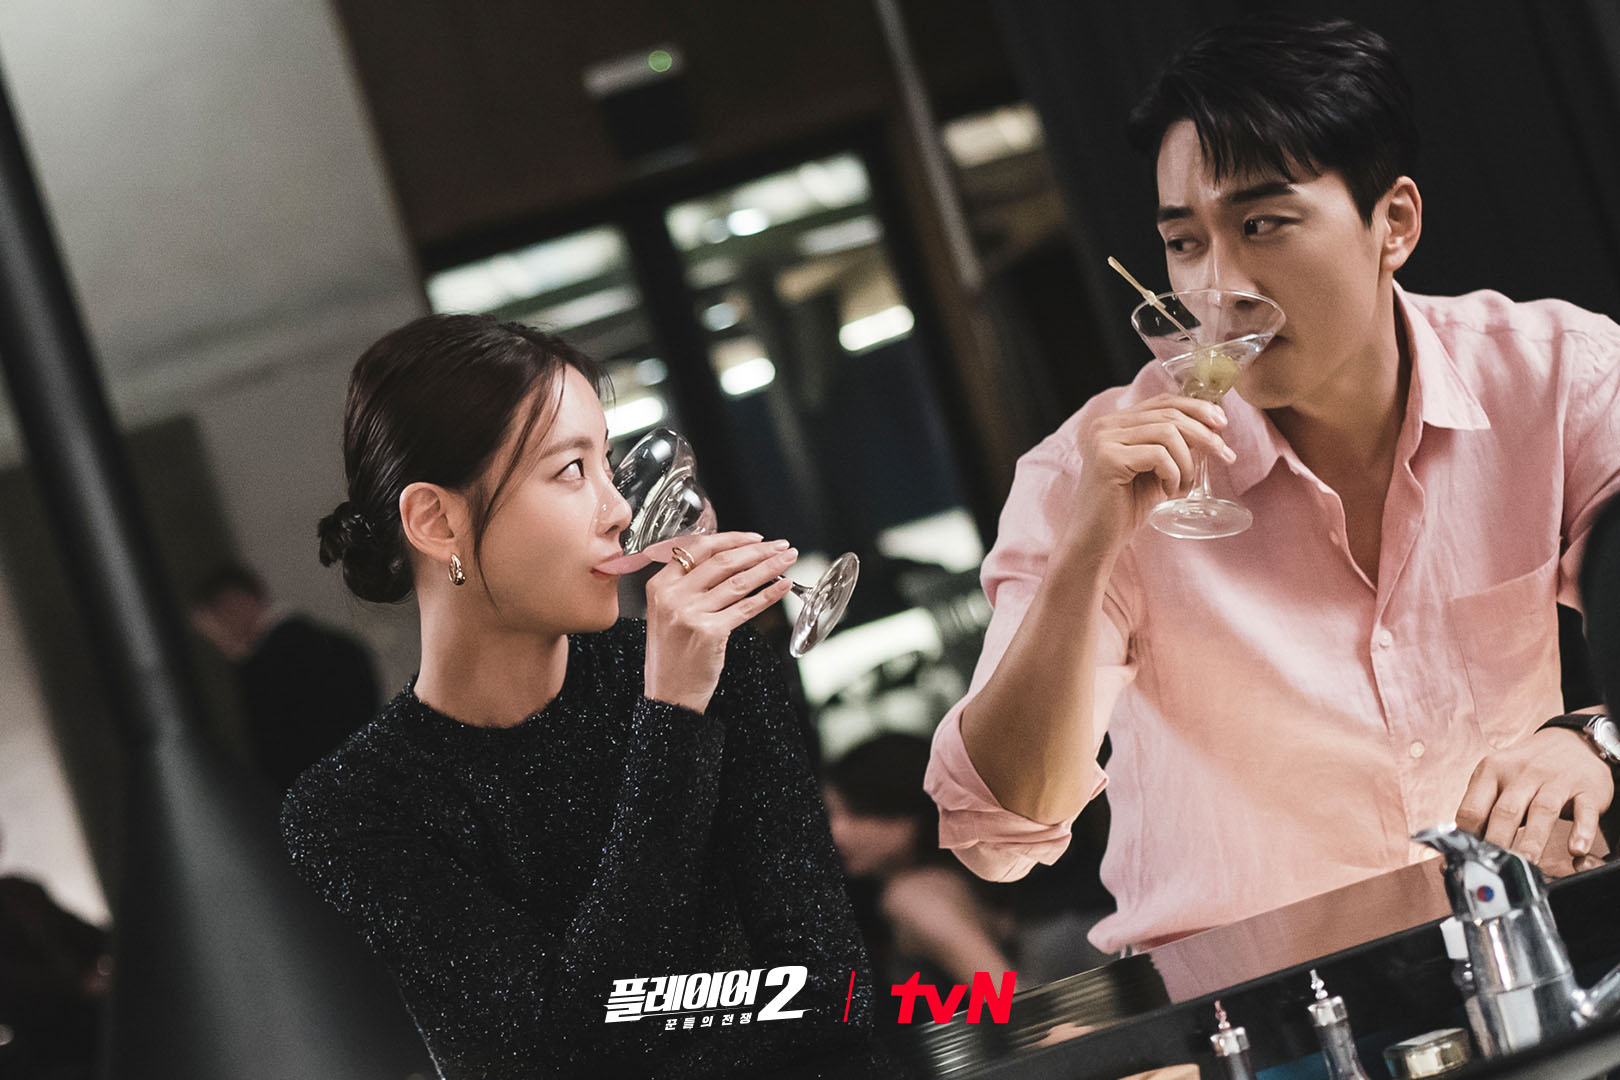 Song Seung Heon and Oh Yeon Seo Engage In A Tense War Of Nerves In 